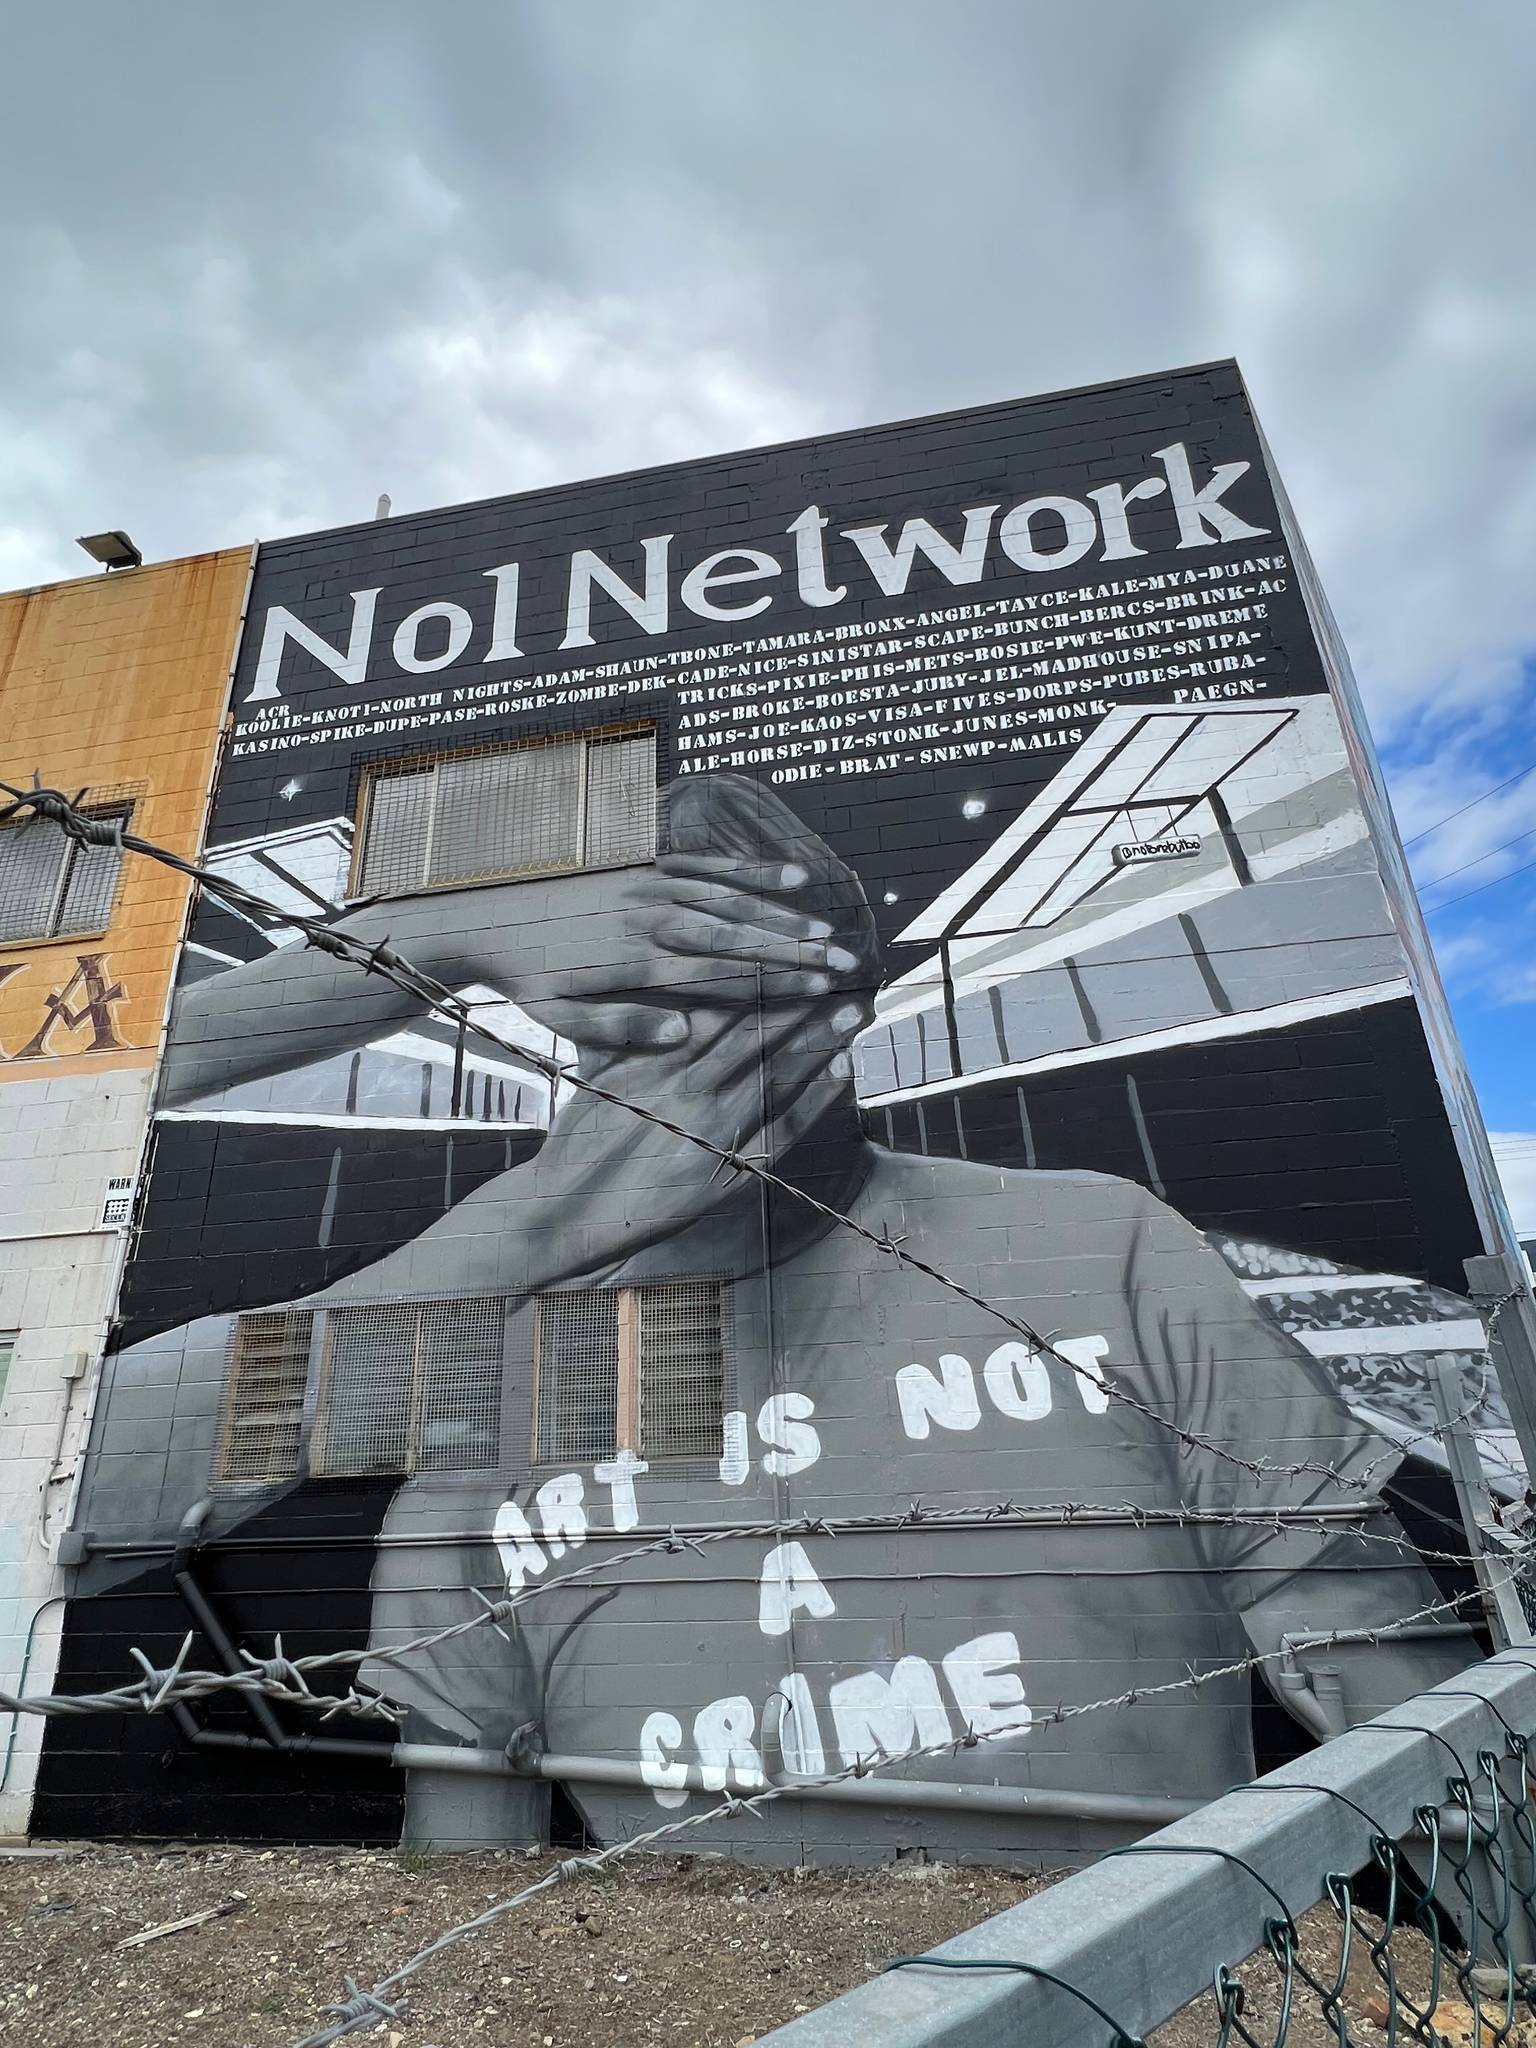 North Nights, NotOneButToo, Koolie ACR&mdash;Art is not a crime 